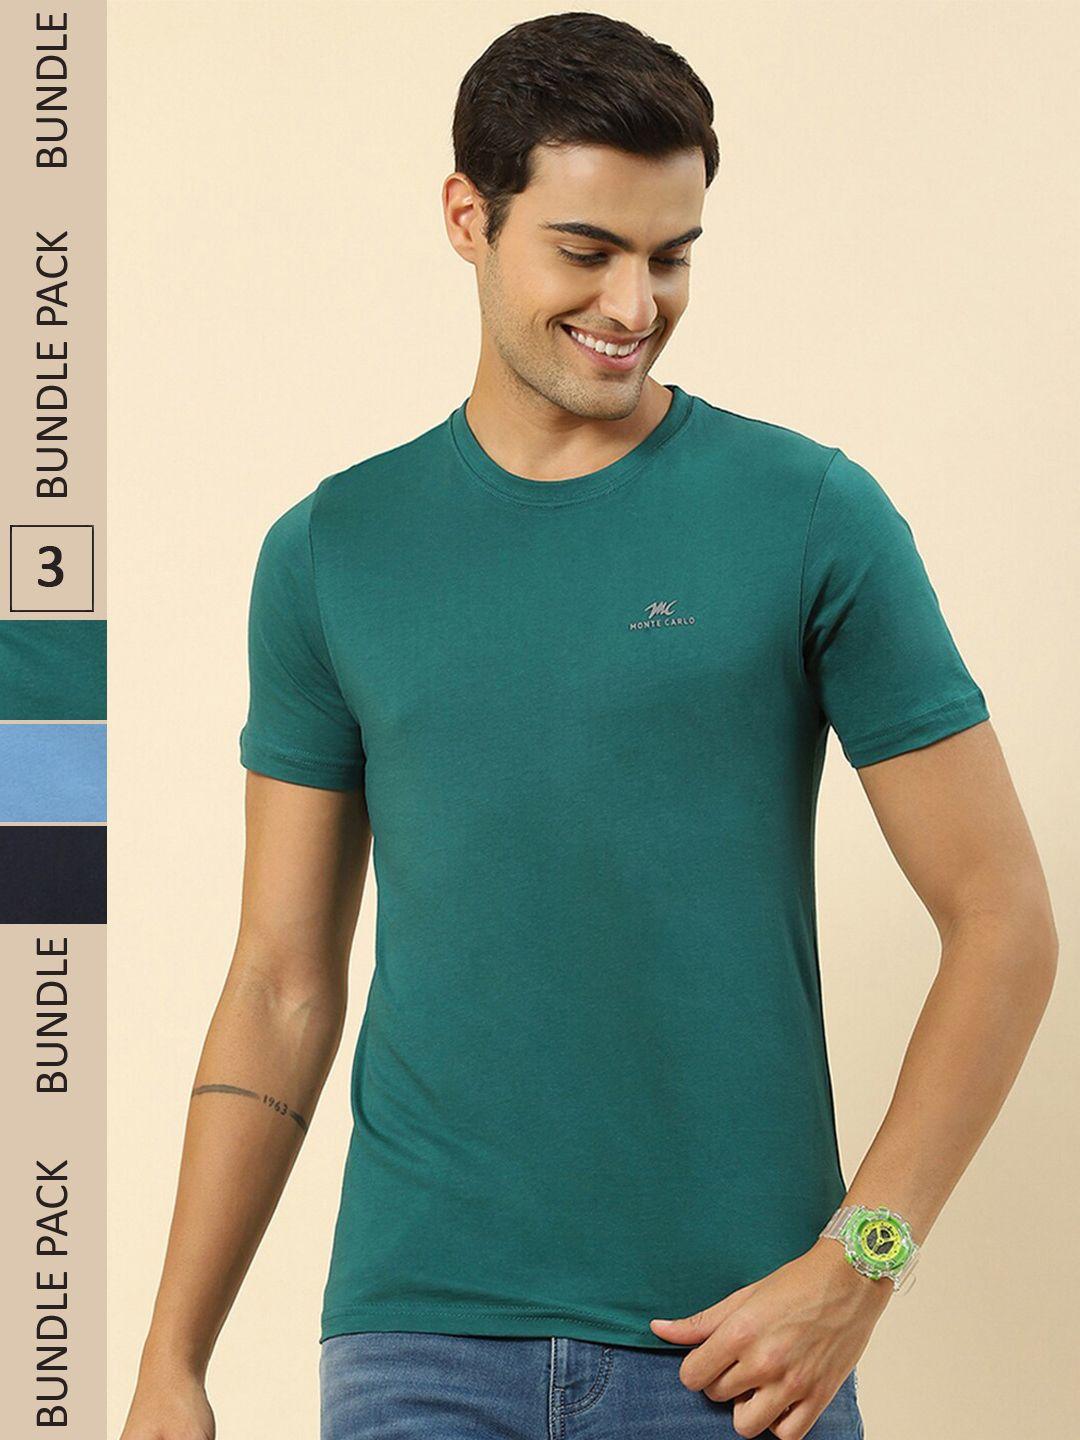 monte-carlo-pack-of-3-round-neck-pure-cotton-t-shirt